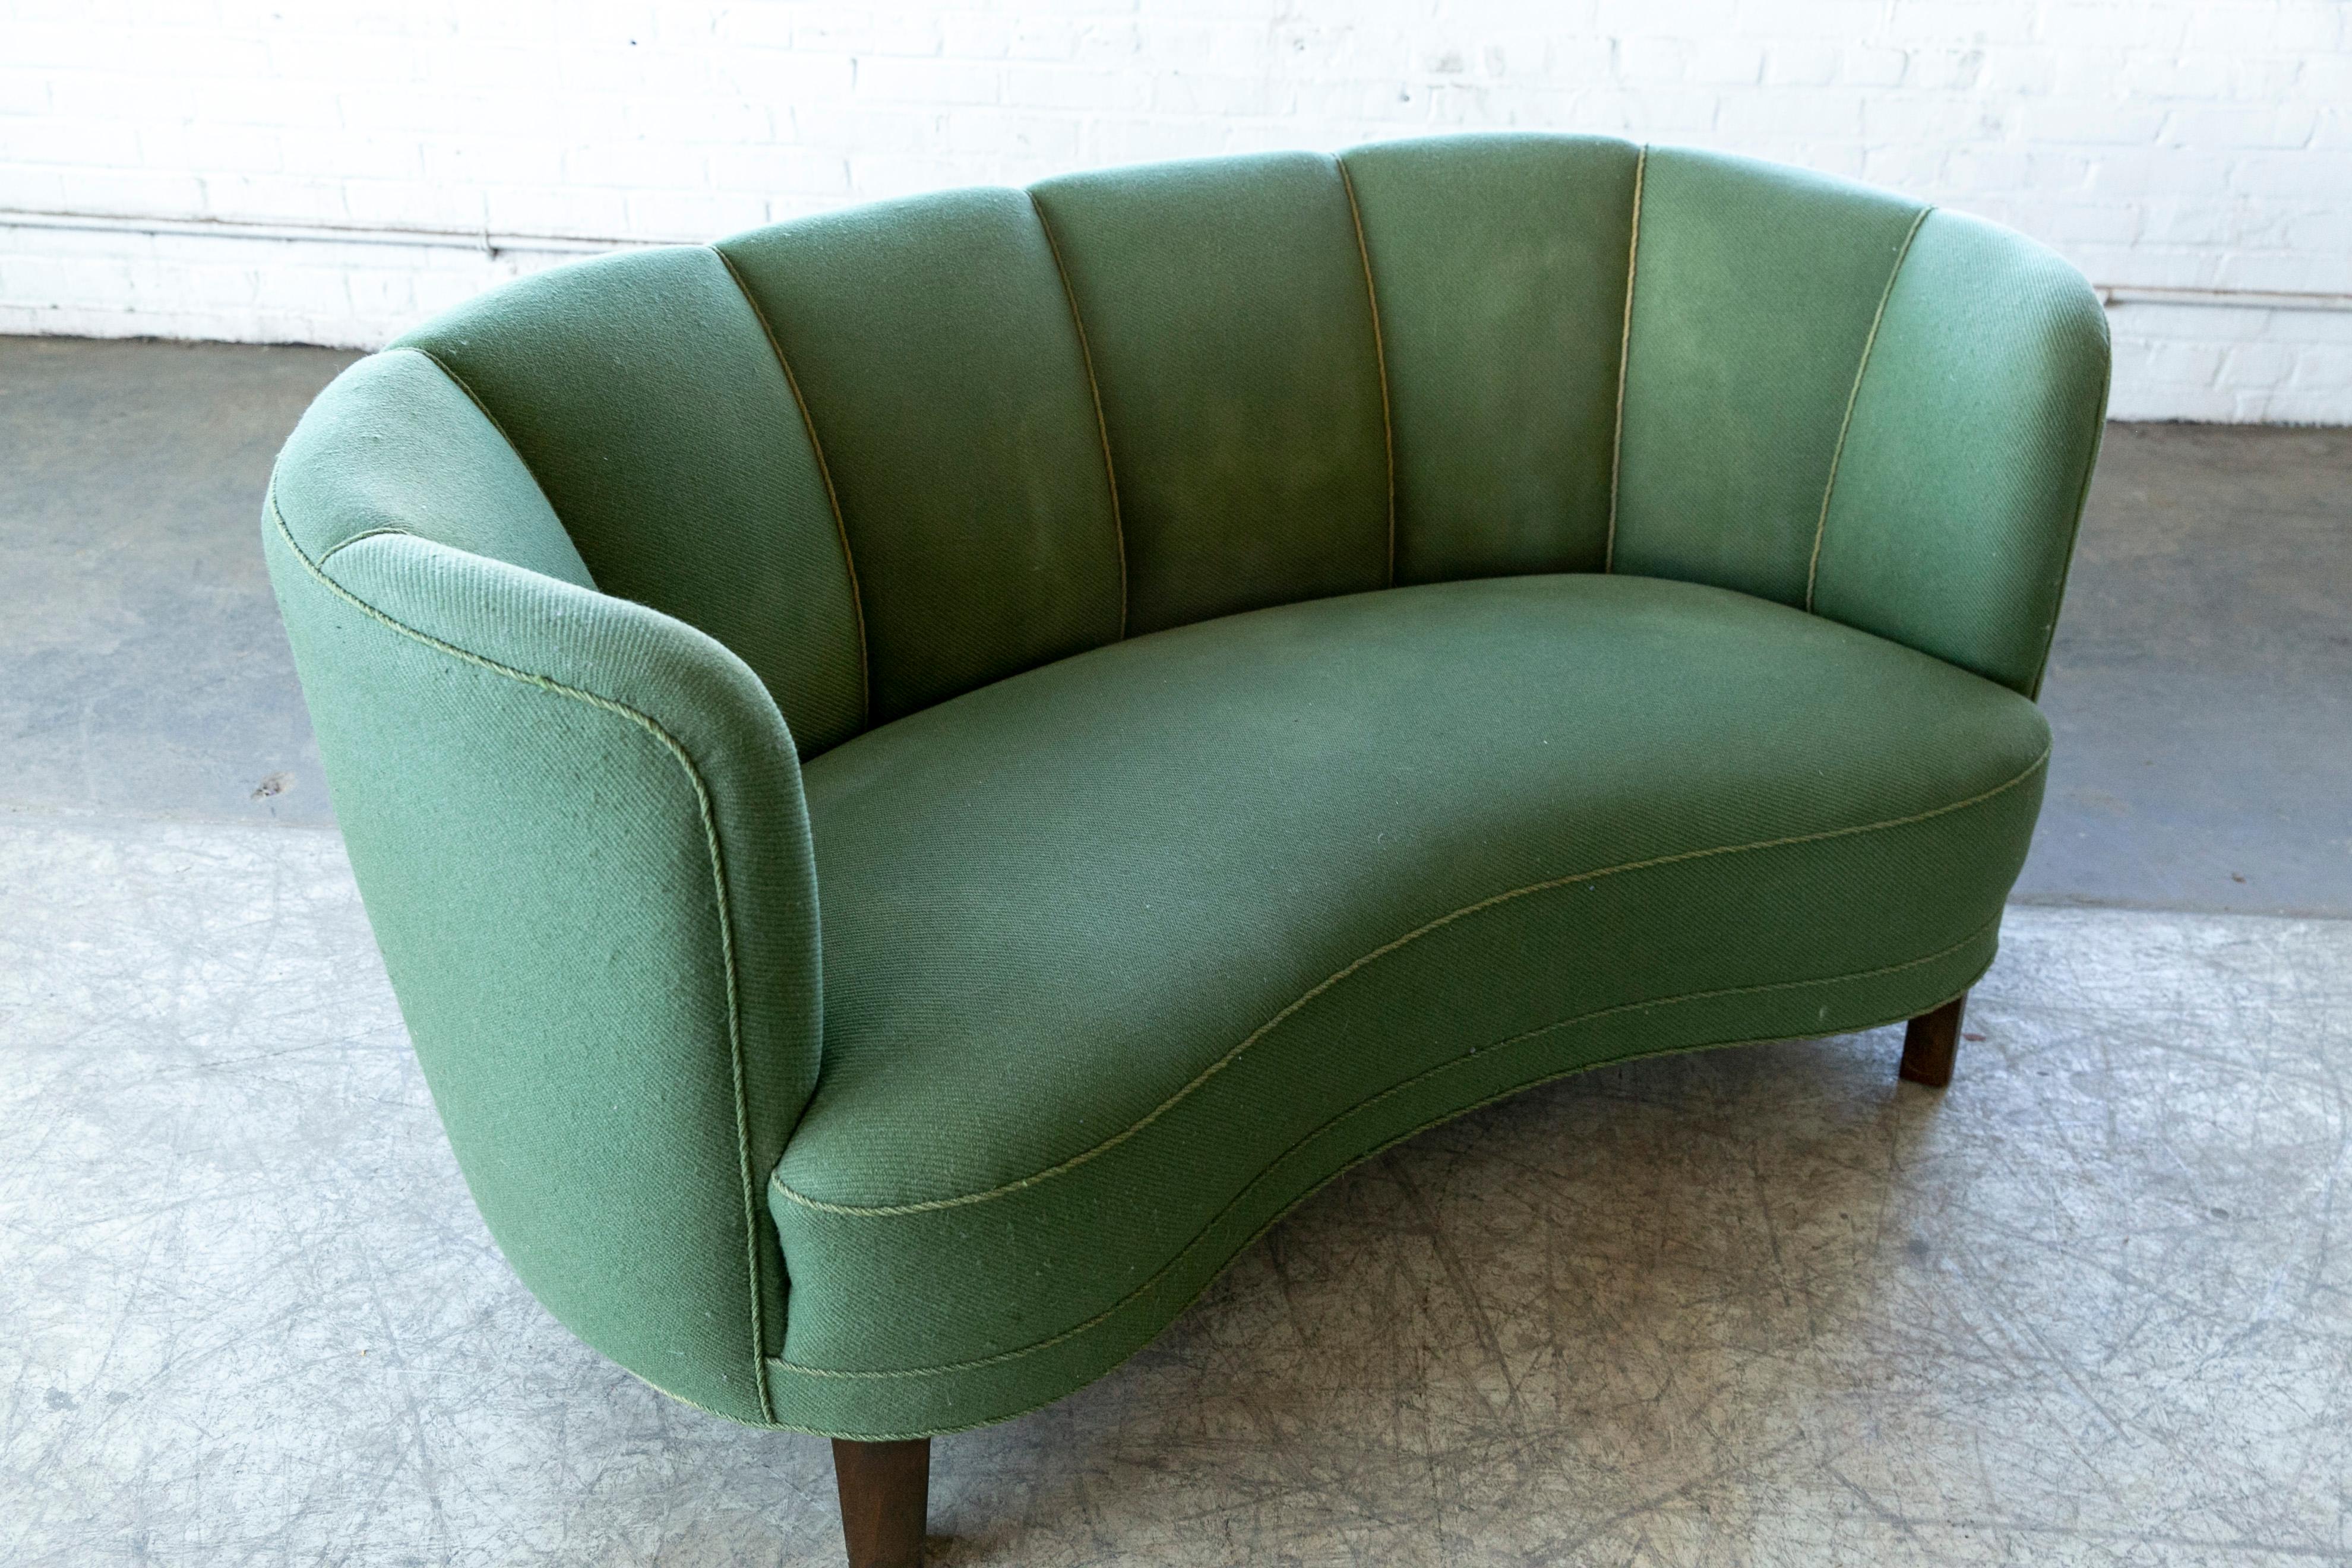 Danish 1940s Channel Back Banana Form Curved Sofa or Loveseat in Green Wool 3